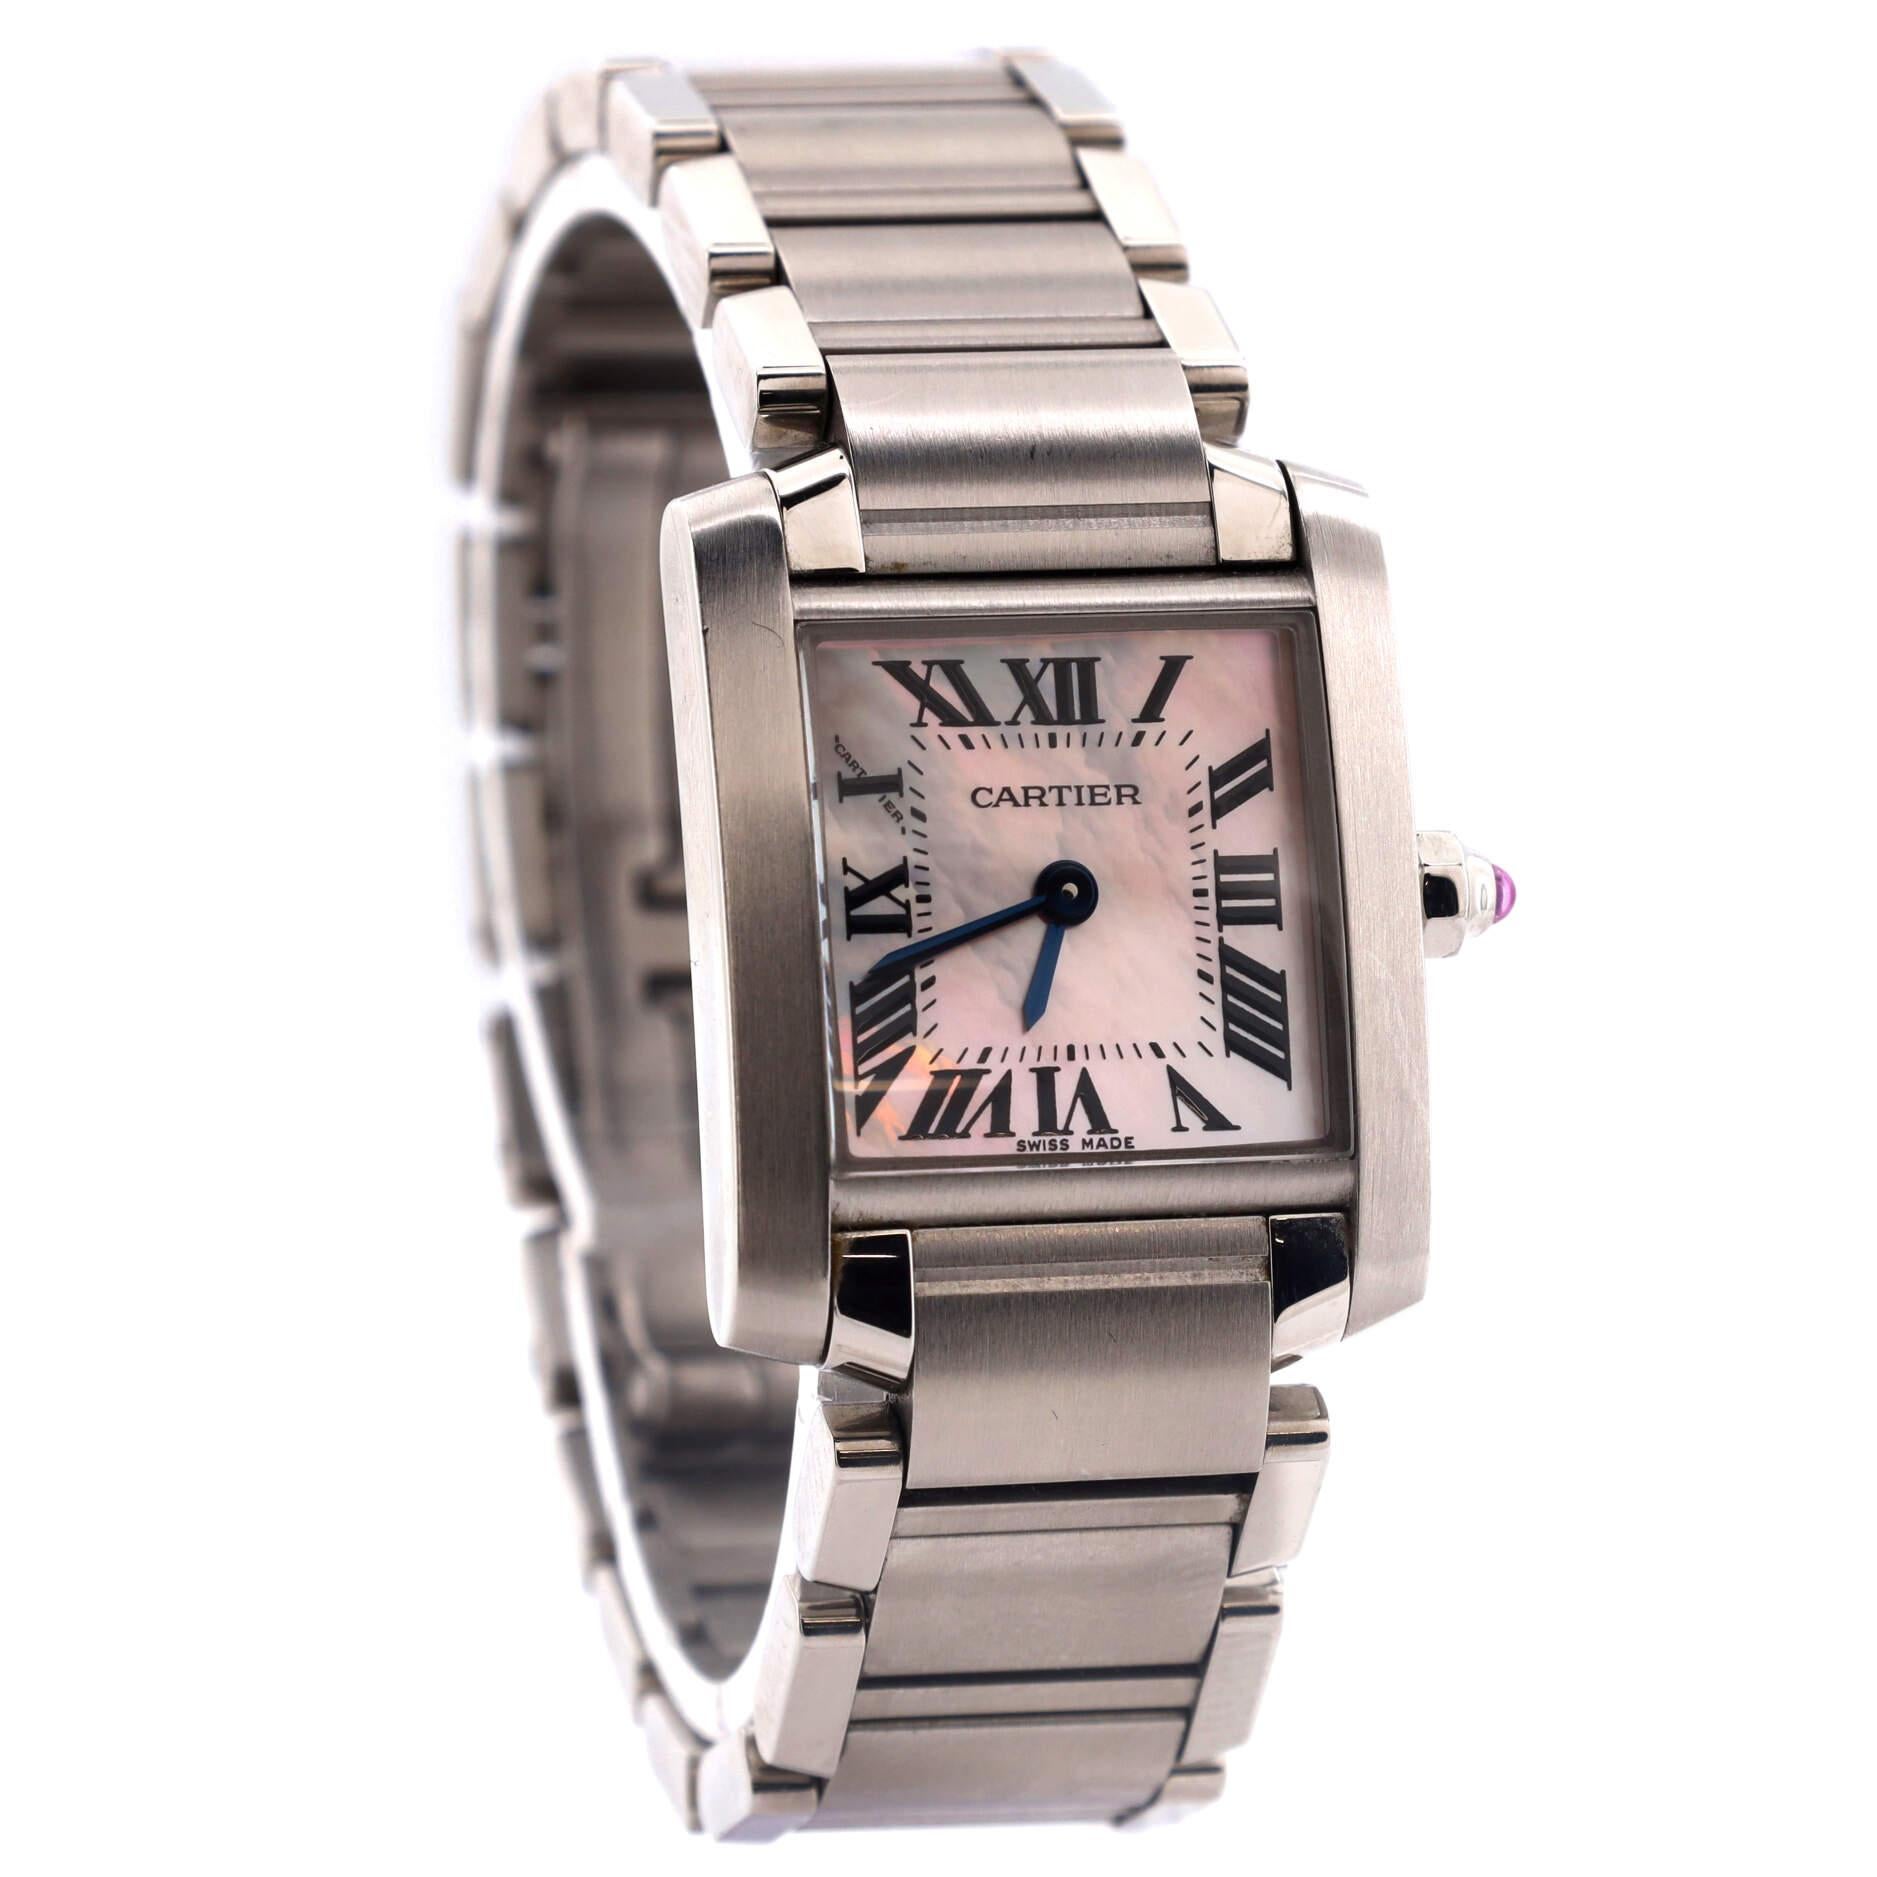 Condition: Very good. Moderate scratches and wear throughout. Wear and scratches on case and bracelet.
Accessories: Warranty Card - Dated, Instruction Booklet
Measurements: Case Size/Width: 20mm, Watch Height: 6mm, Band Width: 15mm, Wrist